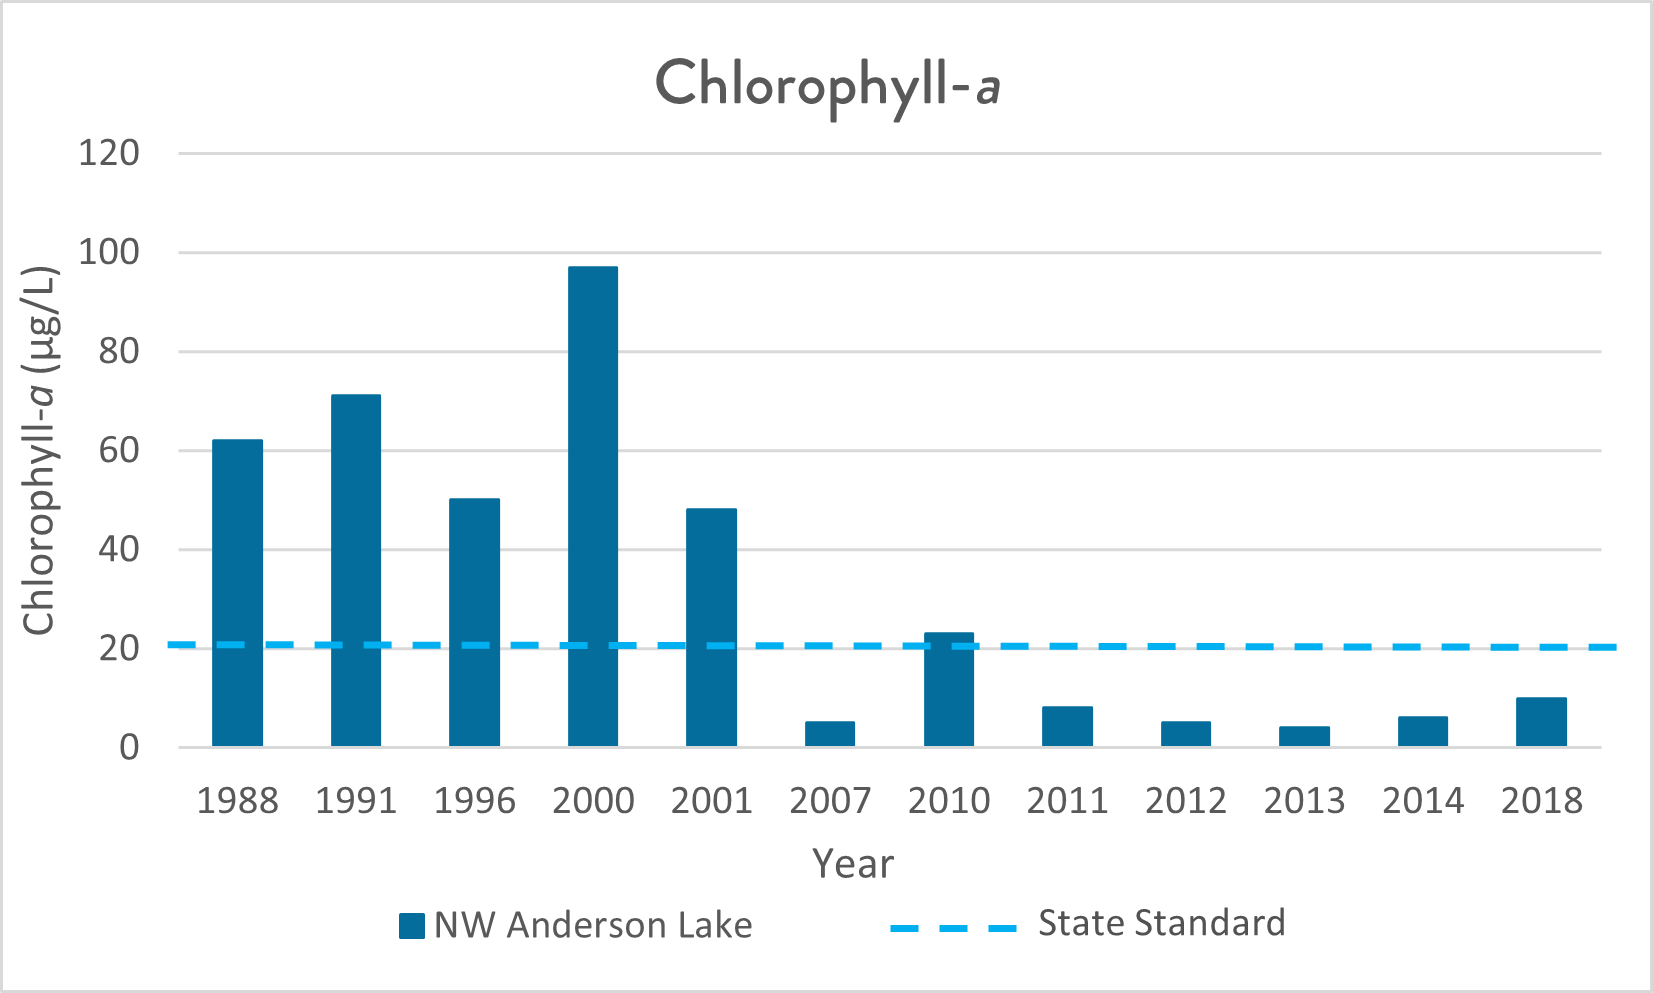 Graph of Chlorophyll-a Levels in NW Anderson Lake from 1988 to 2018